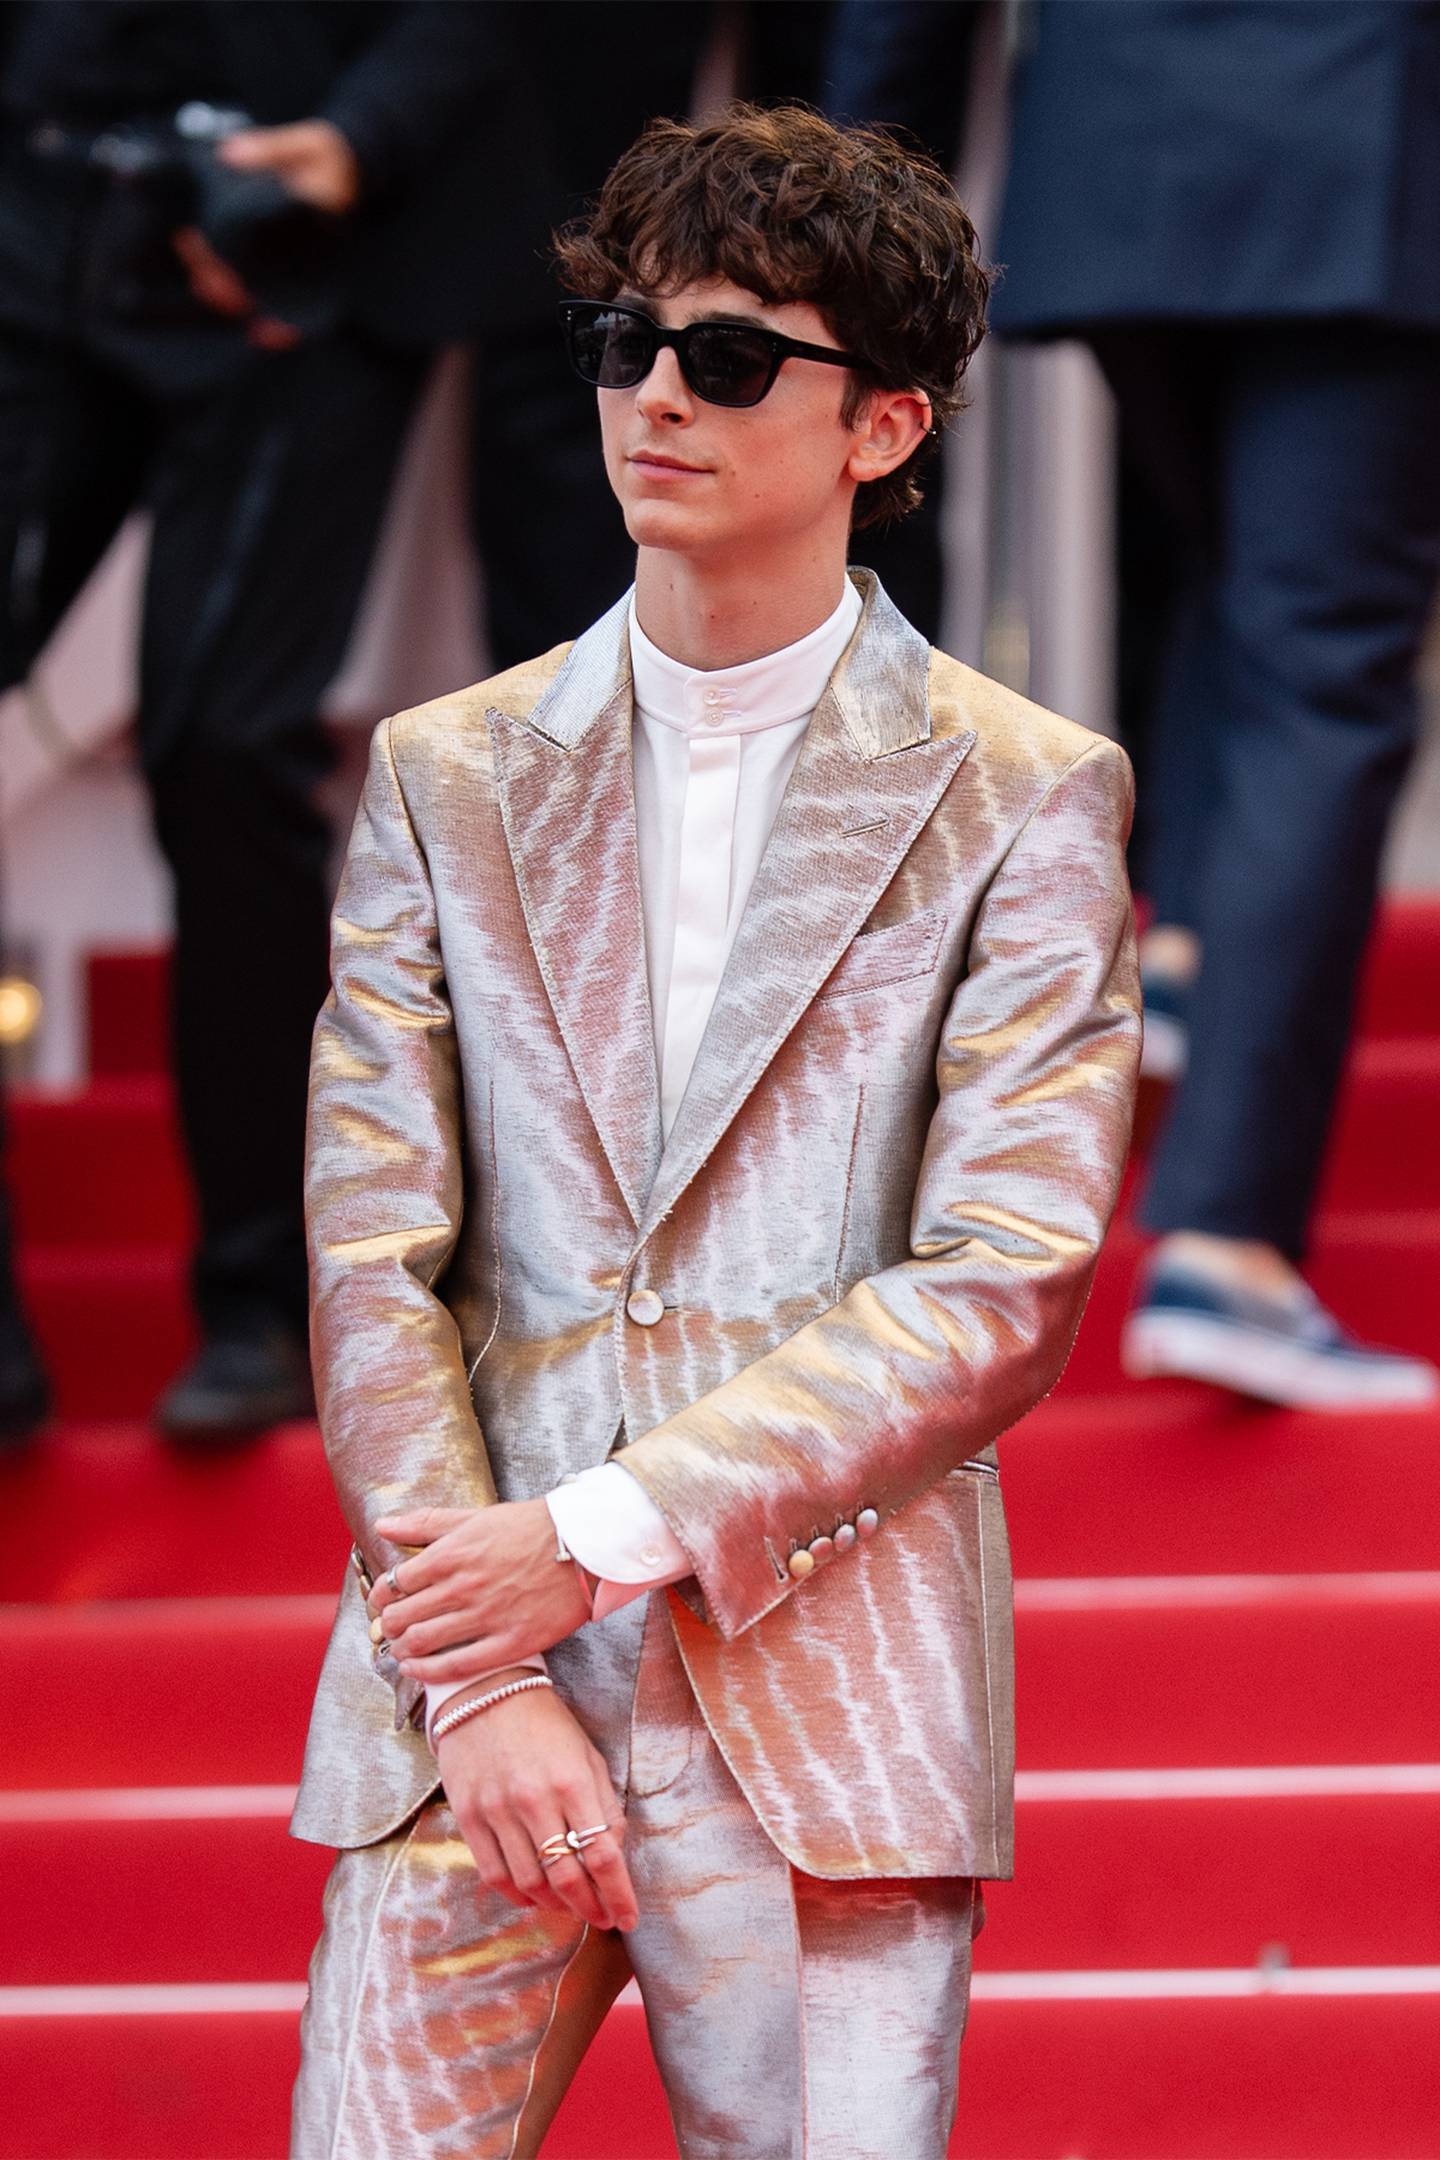 Actor Timothee Chalamet was dripping in Cartier jewels throughout the Cannes Film Festival. Getty.